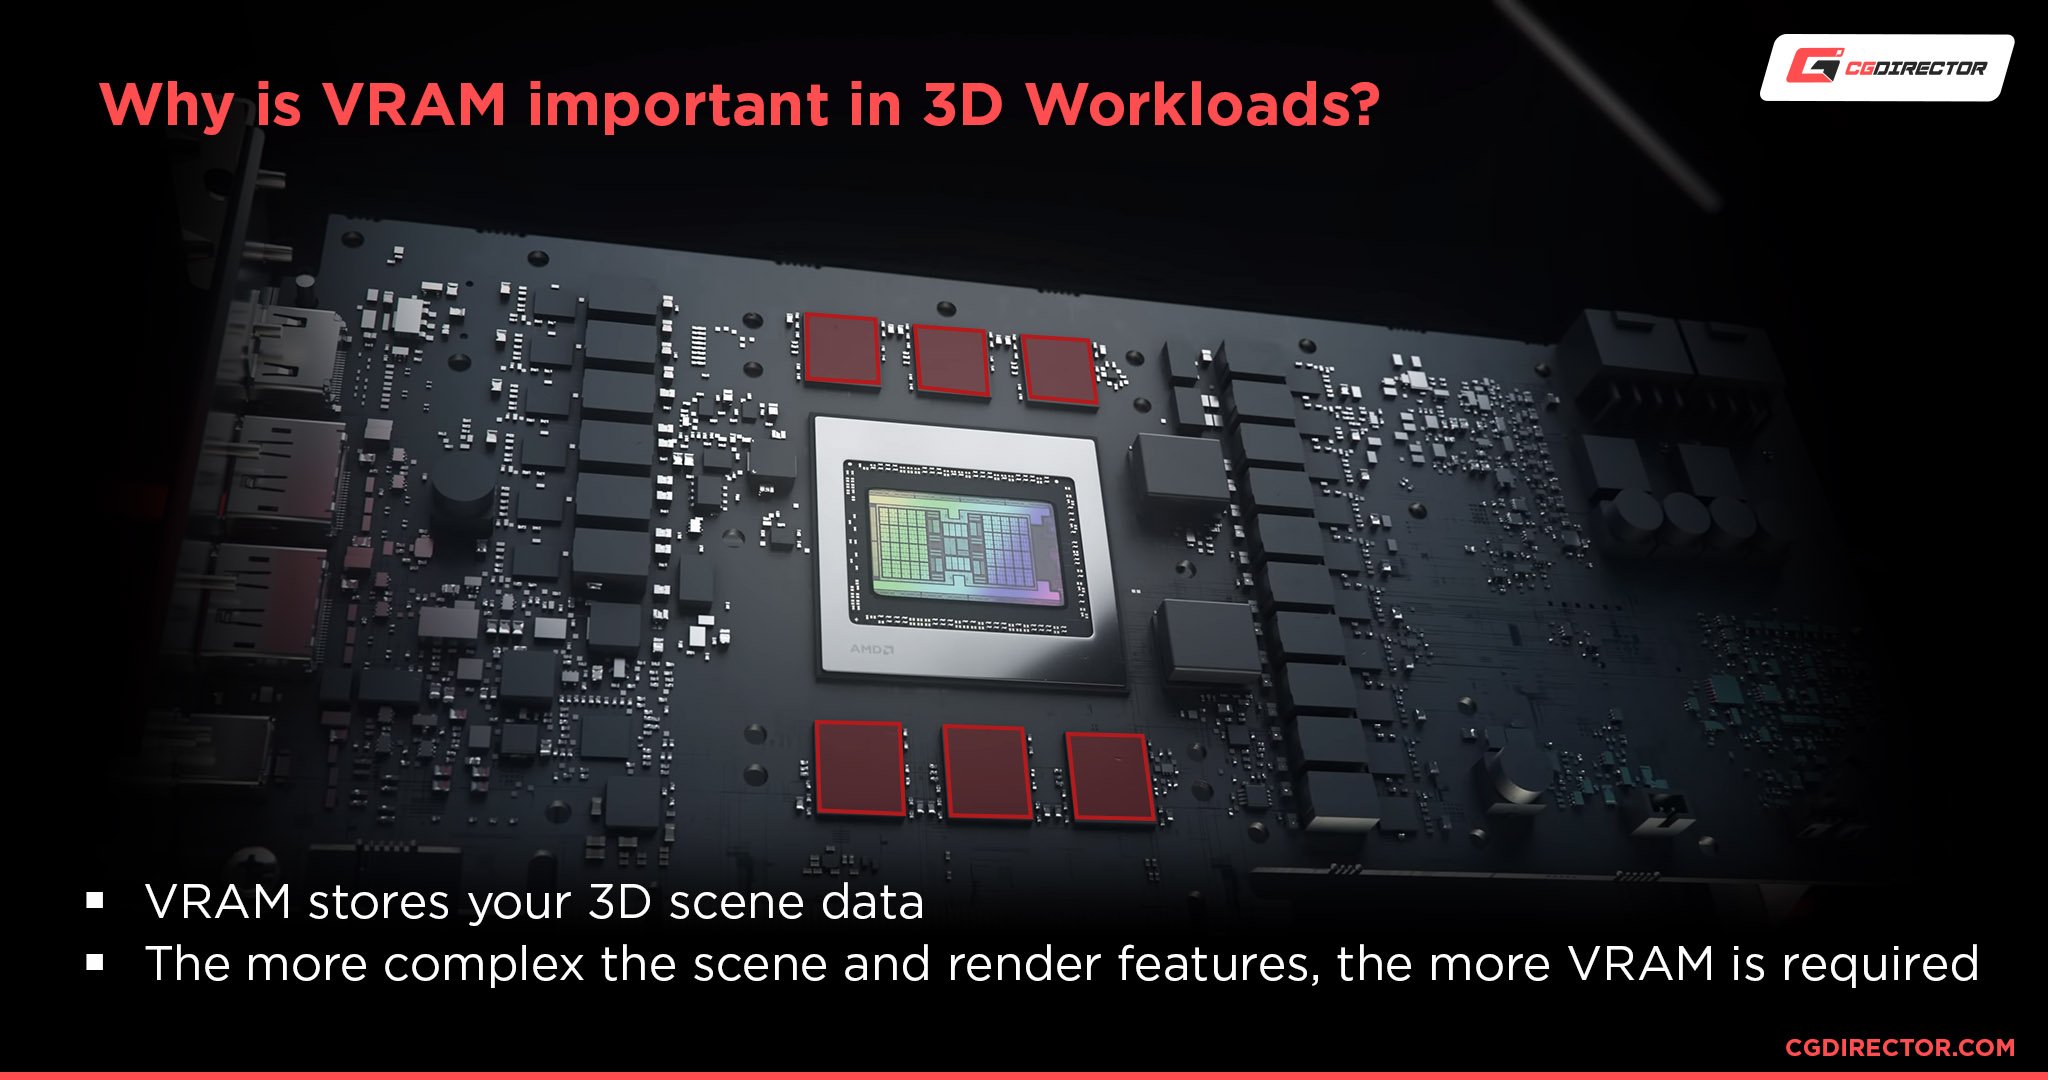 Why is VRAM Important in 3D workloads